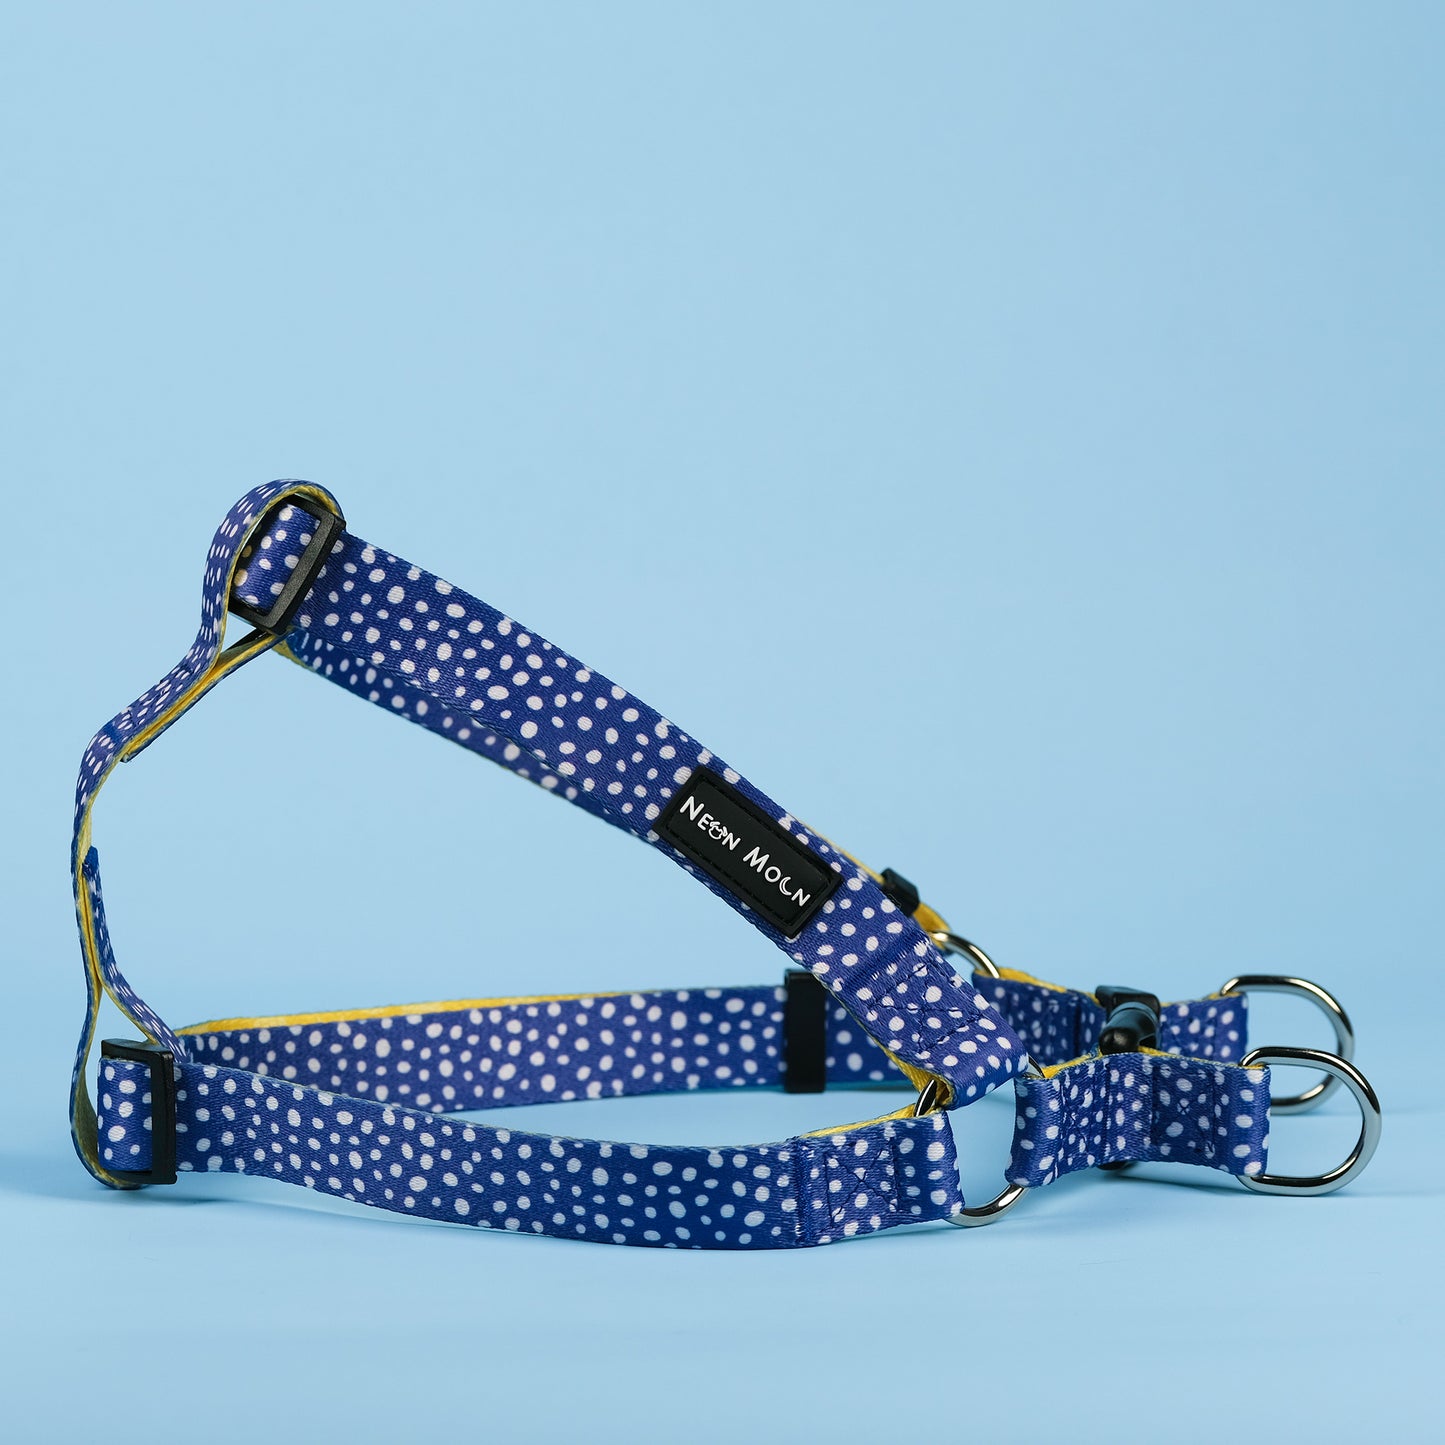 The Minnie polka dot blue step in harness - size large